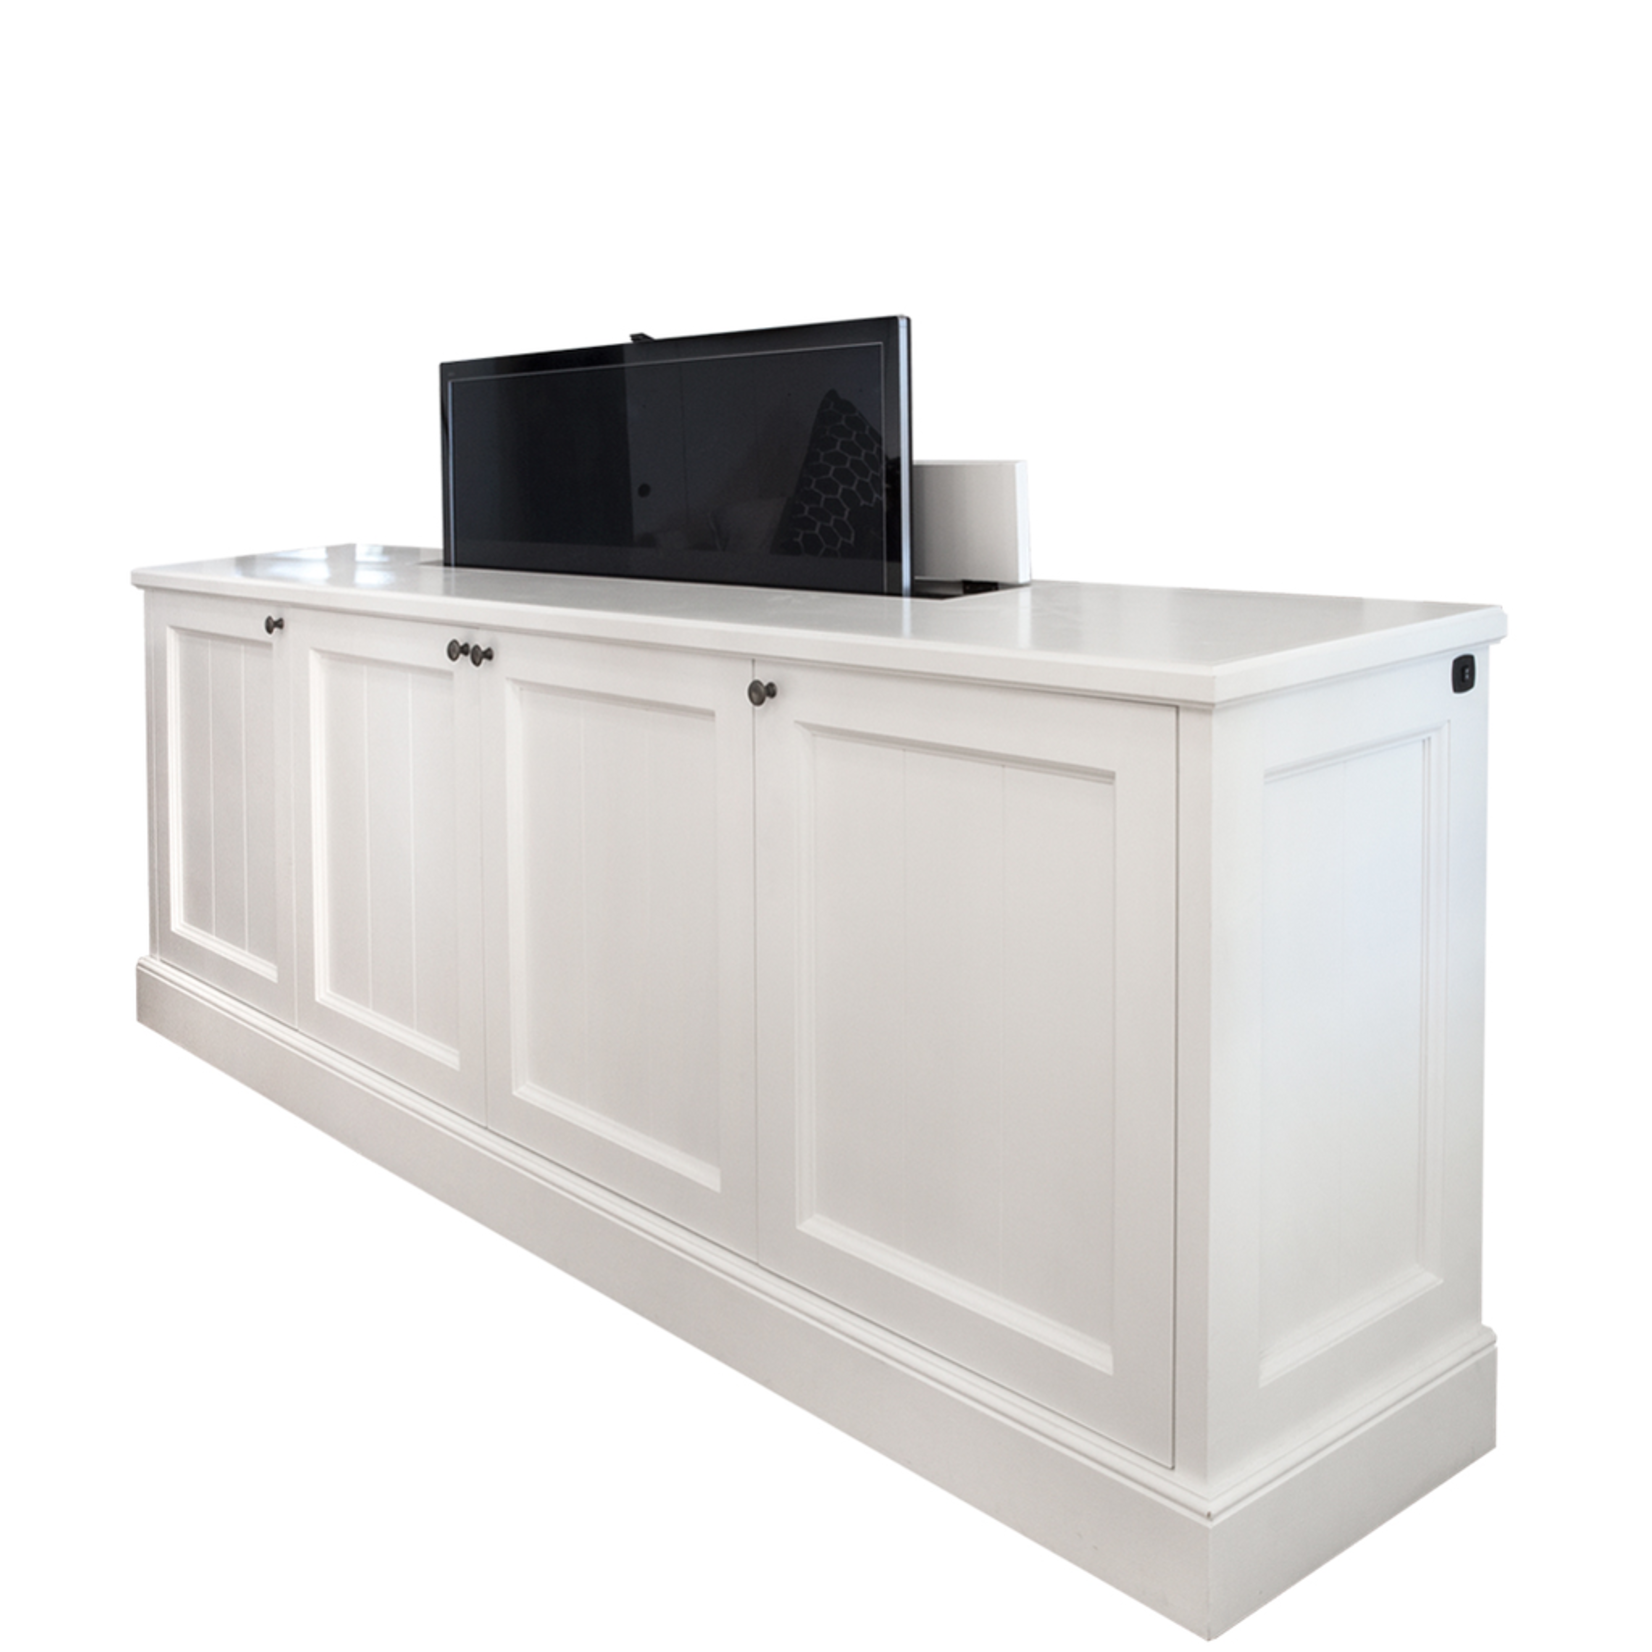 TV-Sideboard mit Lift 245x42xH85cm weiss - Spectroom living and more GmbH | Buffetschränke